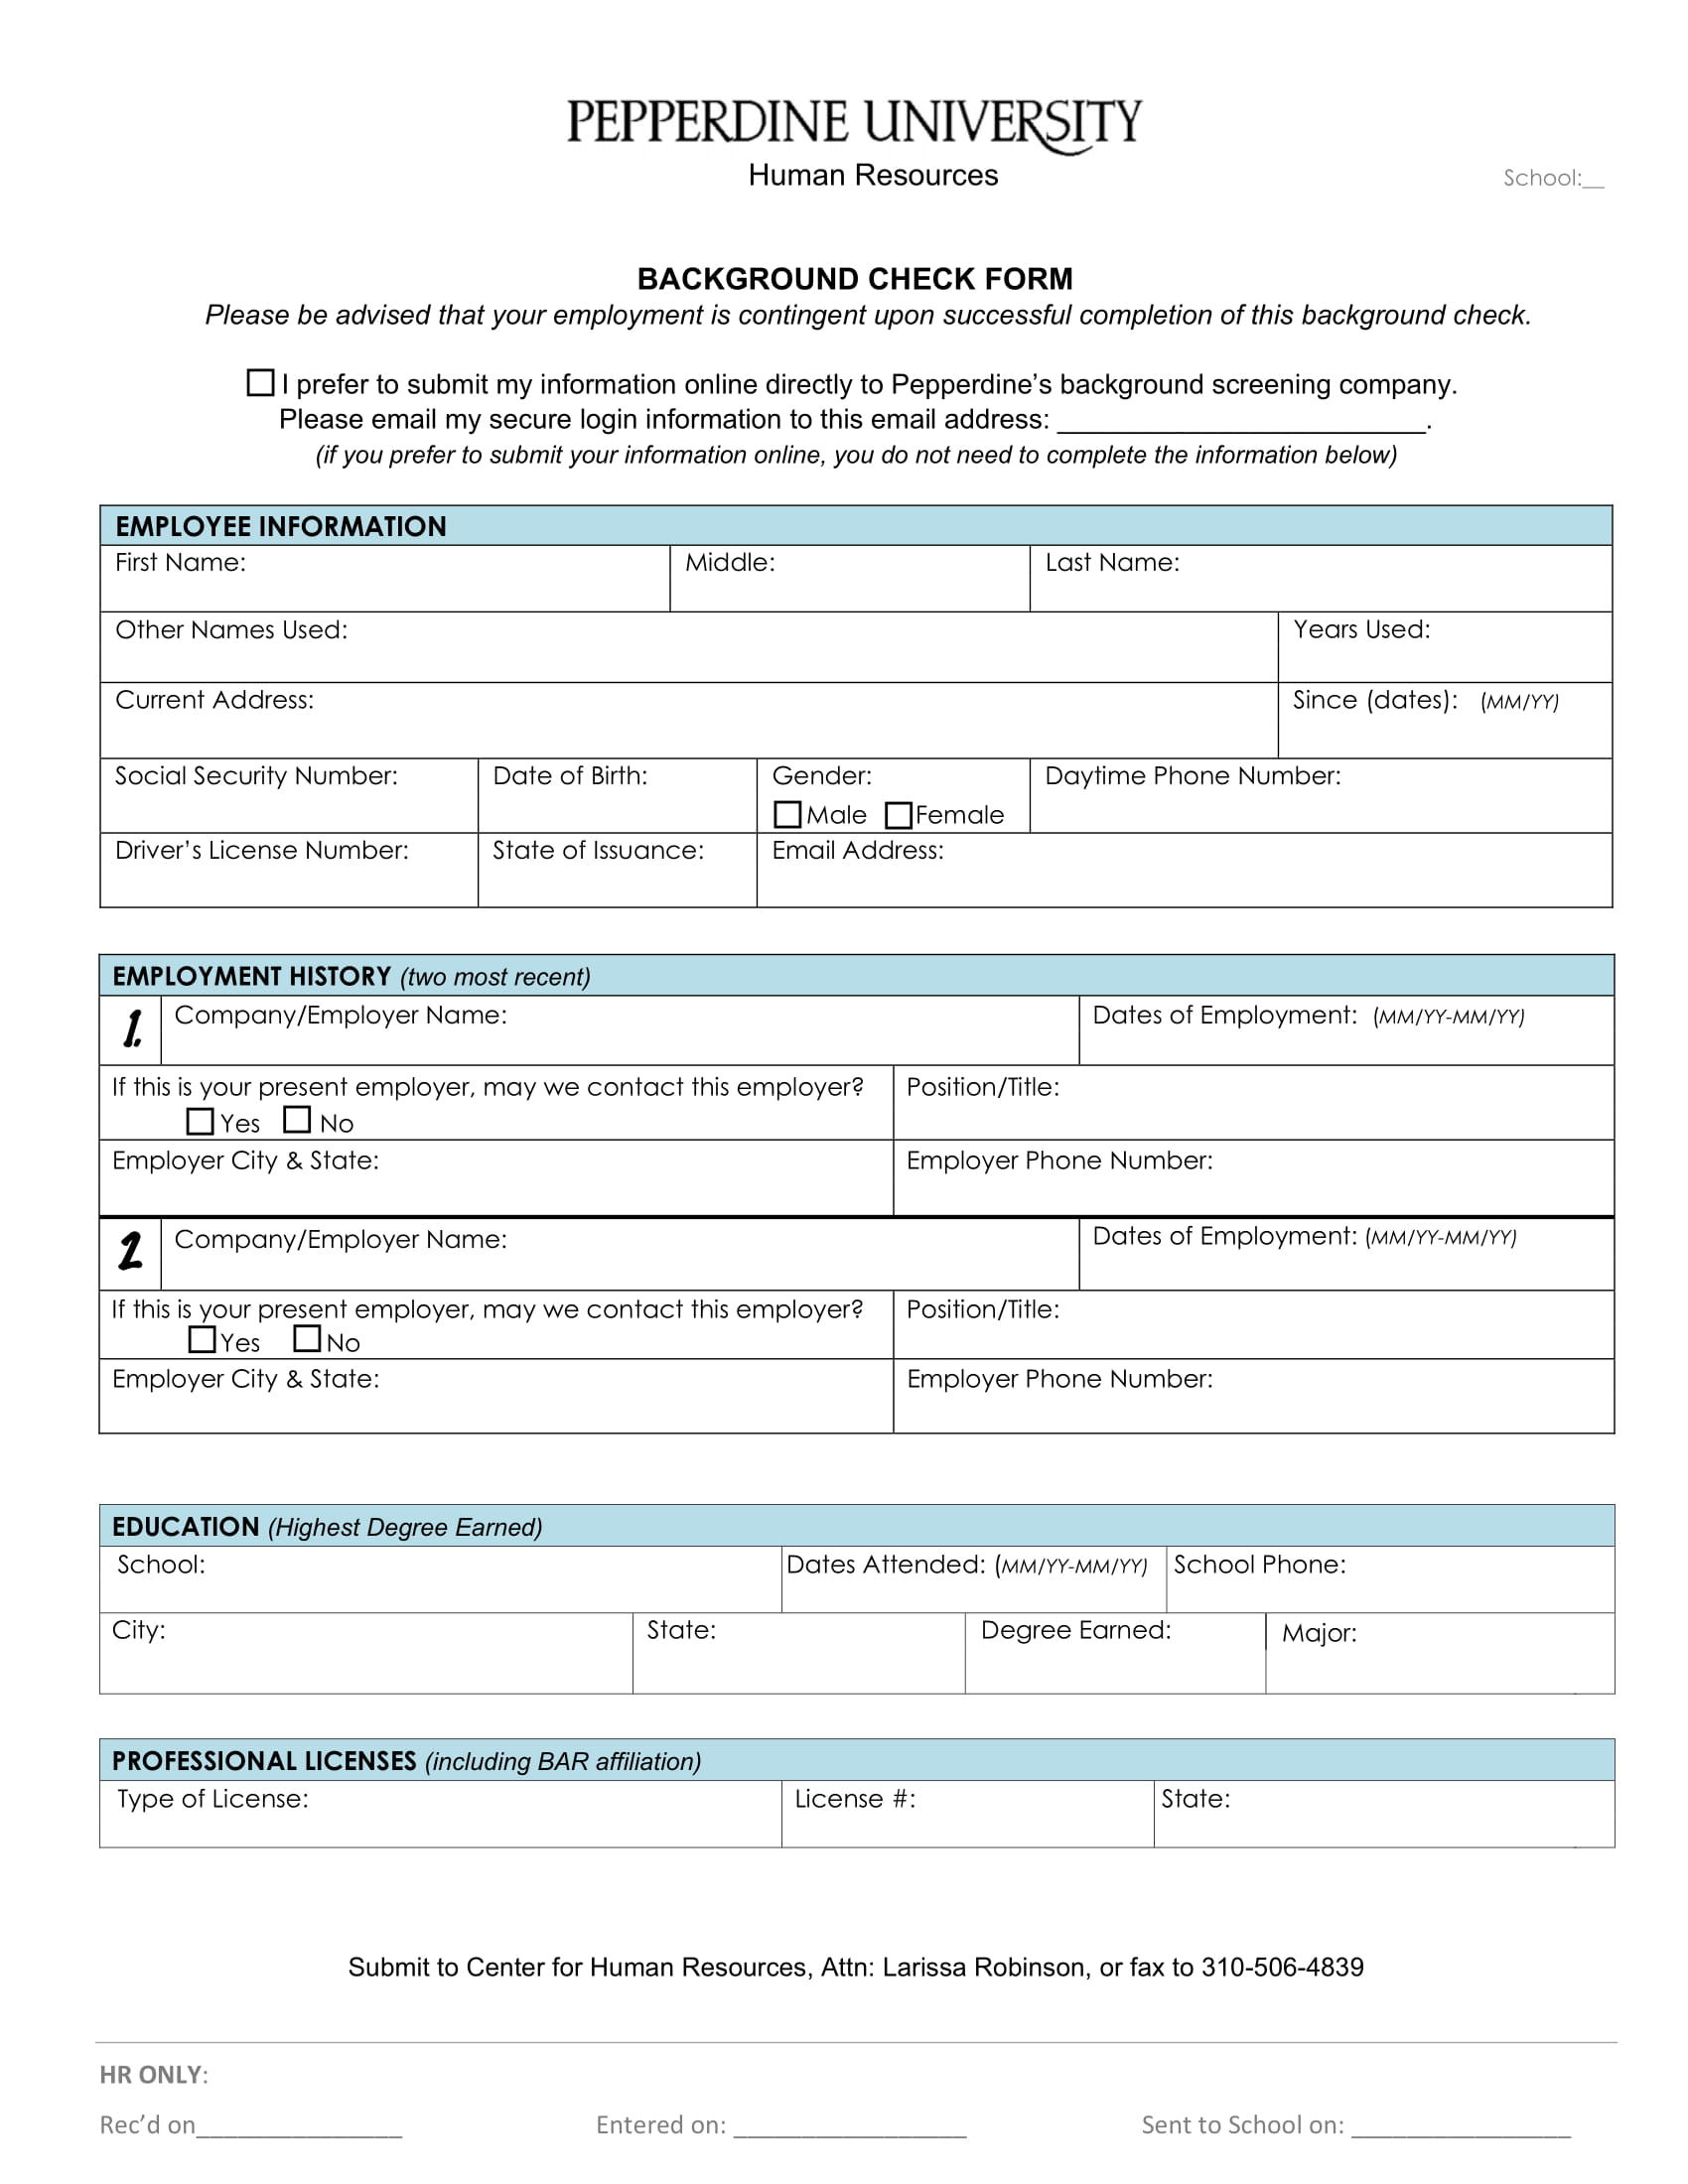 9+ Background Check Form Examples - PDF | Examples